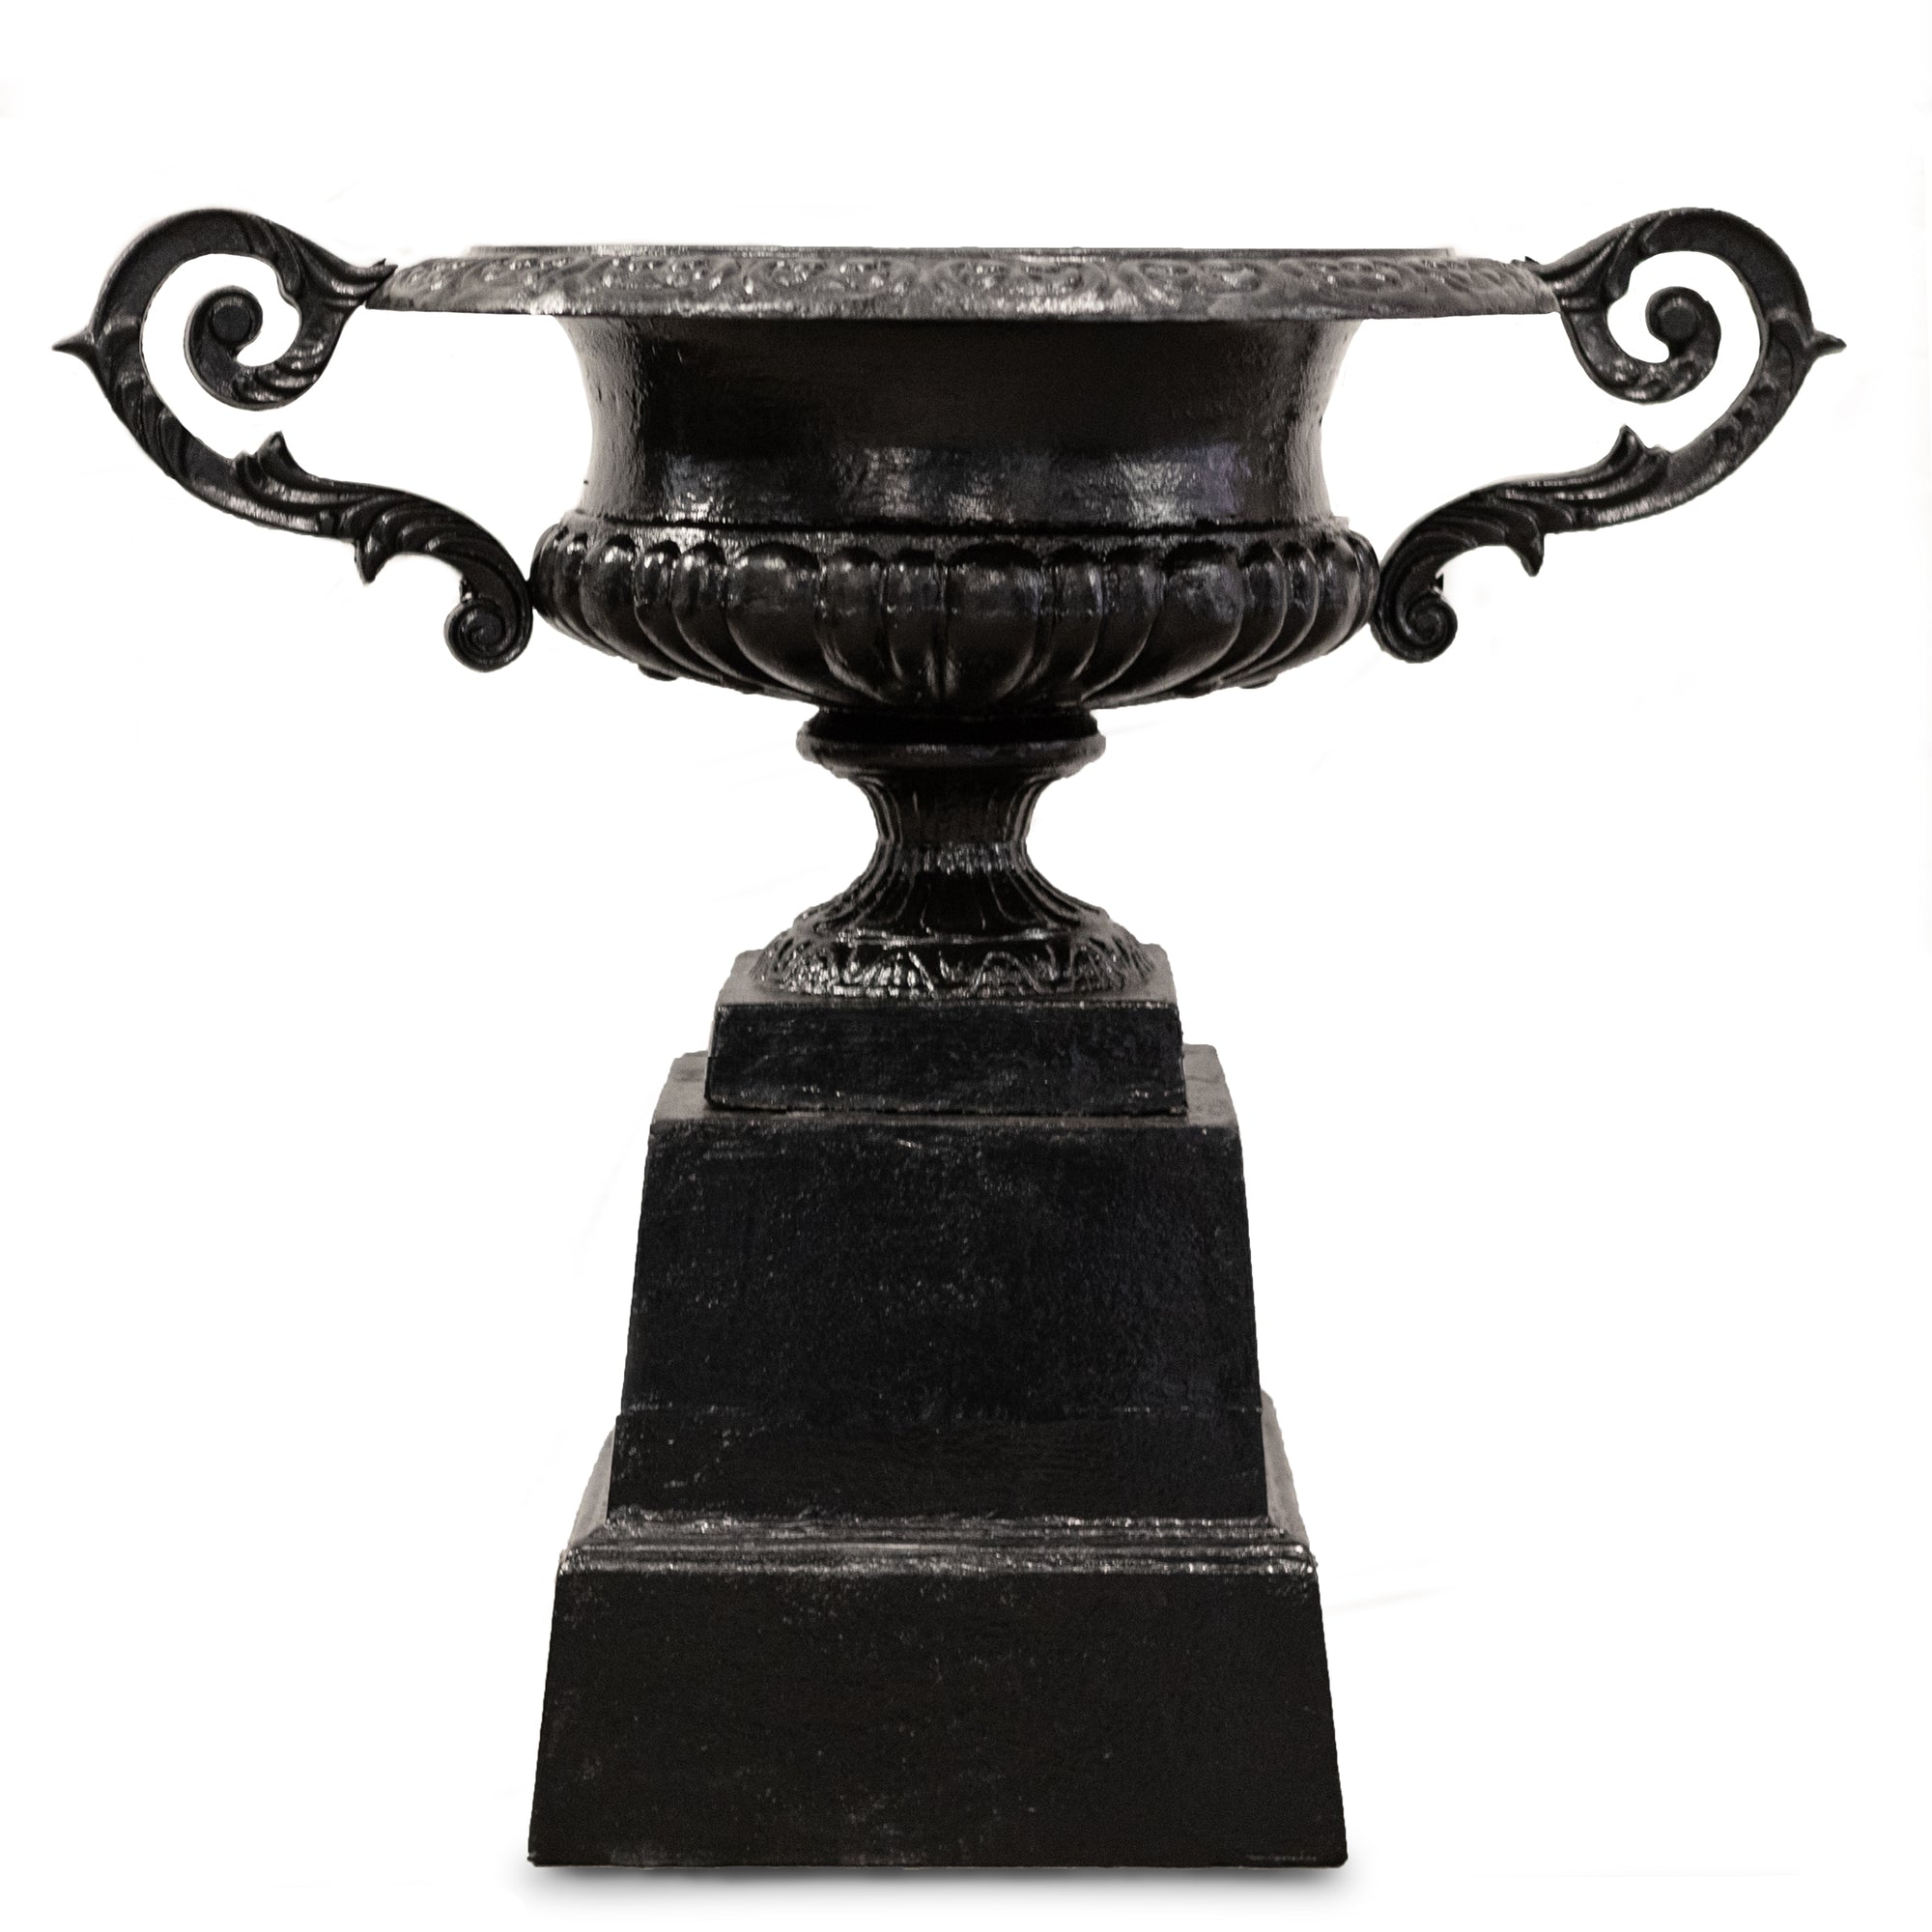 Reclaimed Cast Iron Urn | Planter on Plinth | The Architectural Forum